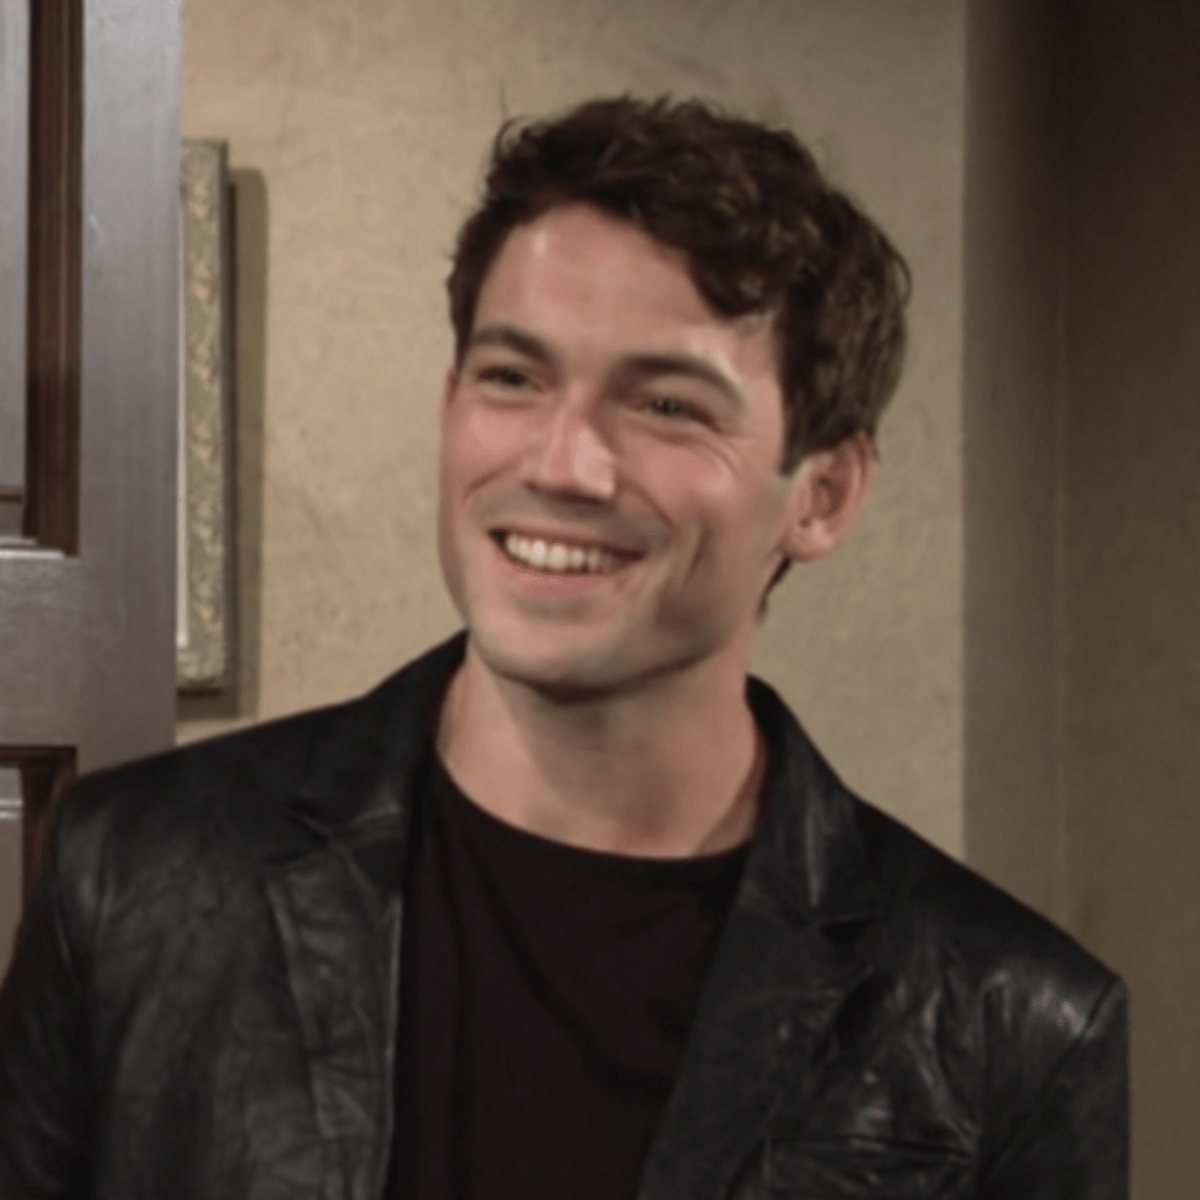 Young & Restless Star Gets New Look: Photo of Rory Gibson's Haircut